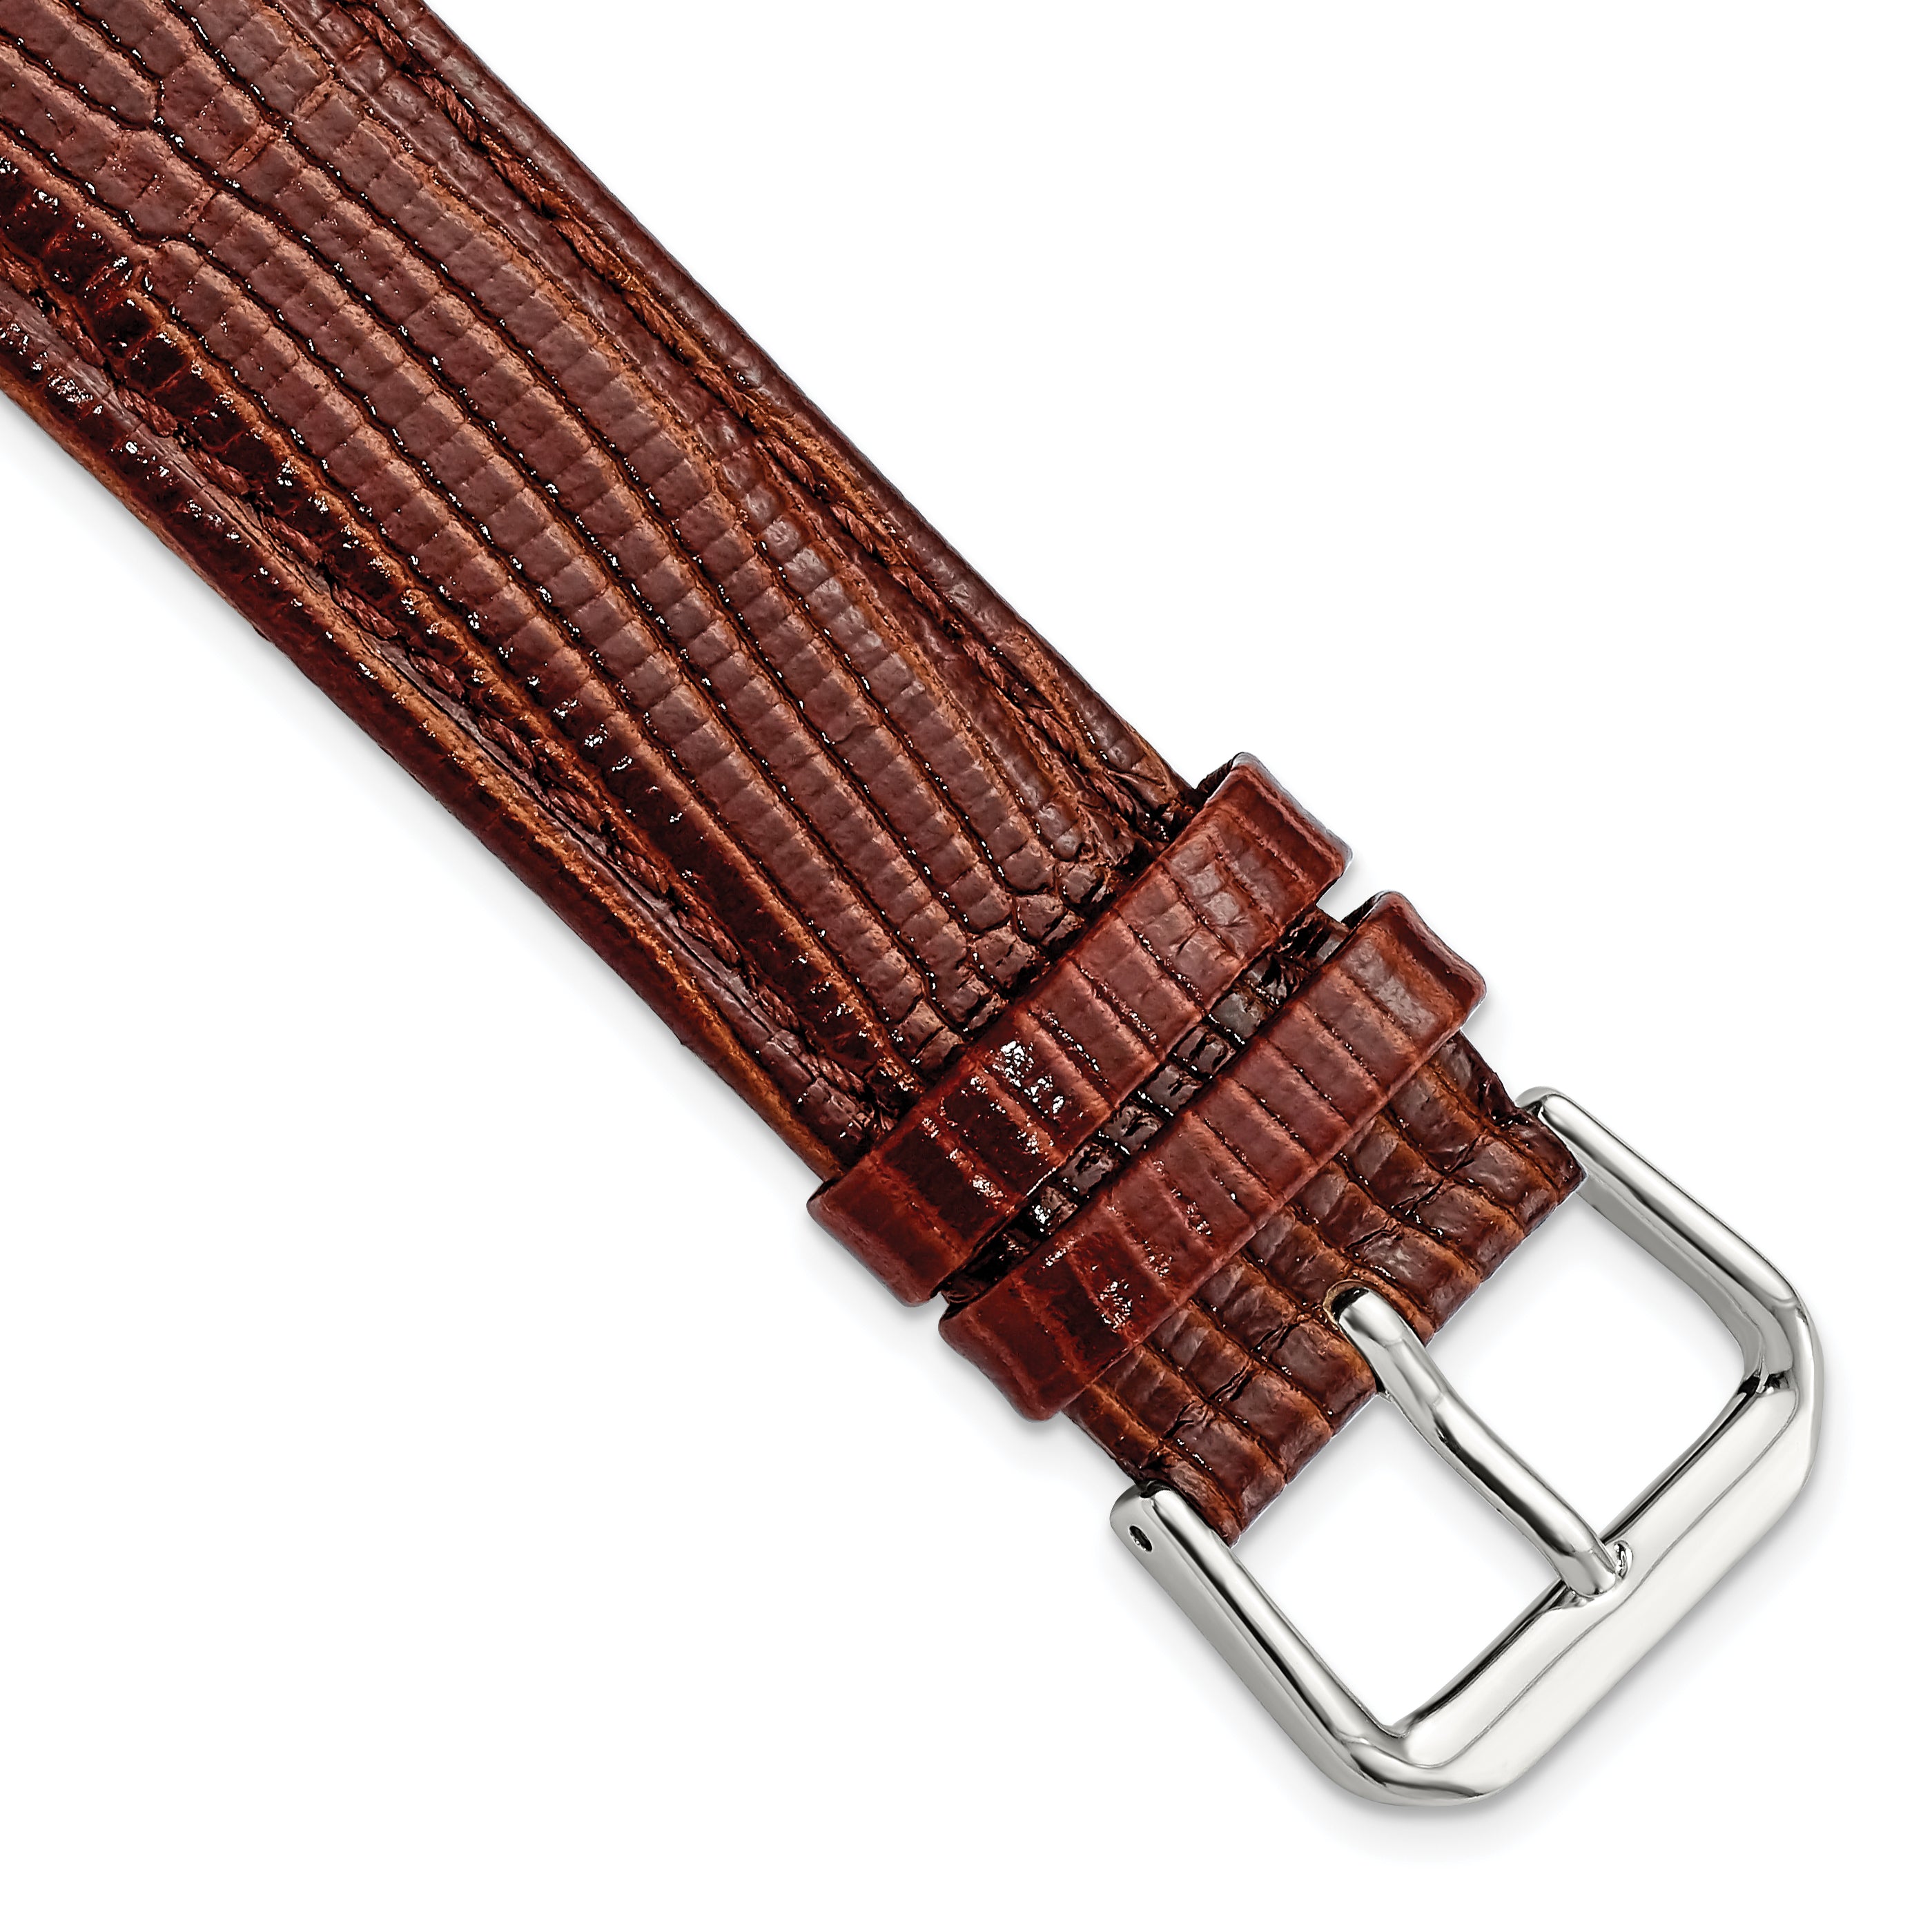 DeBeer 20mm Havana Brown Snake Grain Leather with Silver-tone Buckle 7.5 inch Watch Band